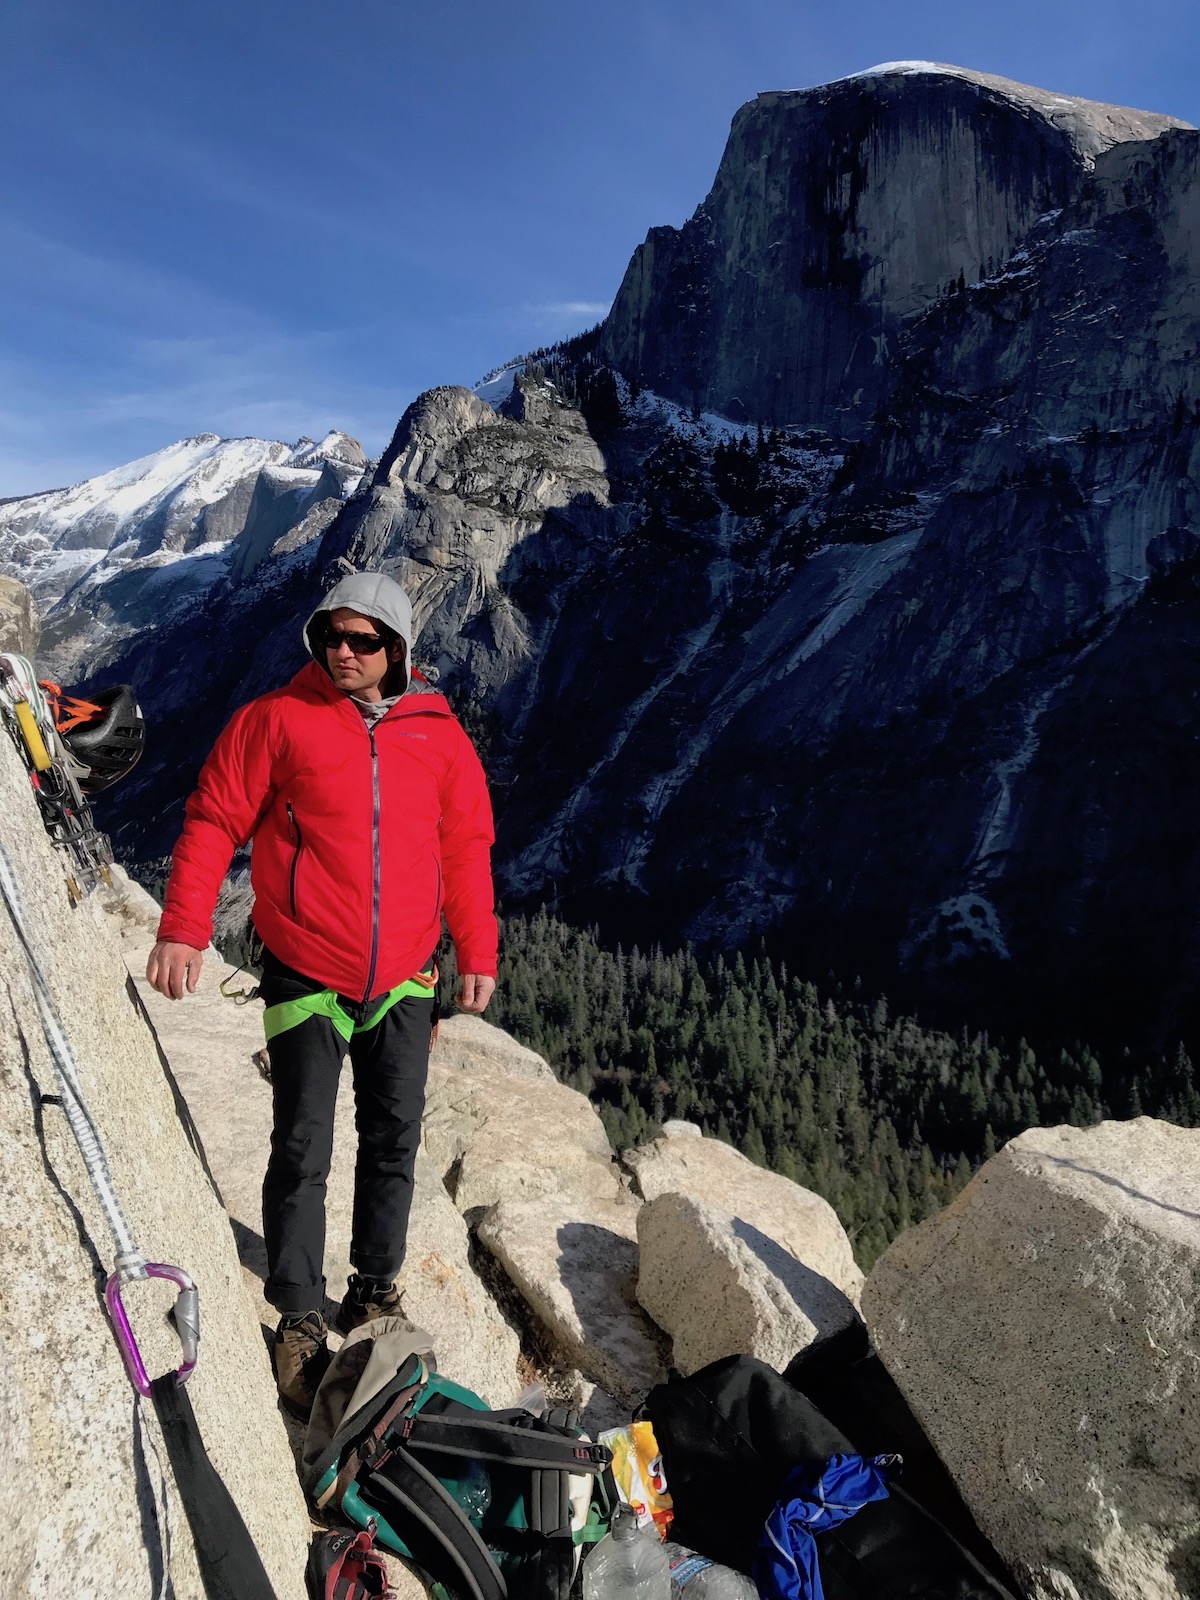 The author on Washington Column wearing the Patagonia Mirco Puff Storm Jacket. [Photo] Andy Hoeckel